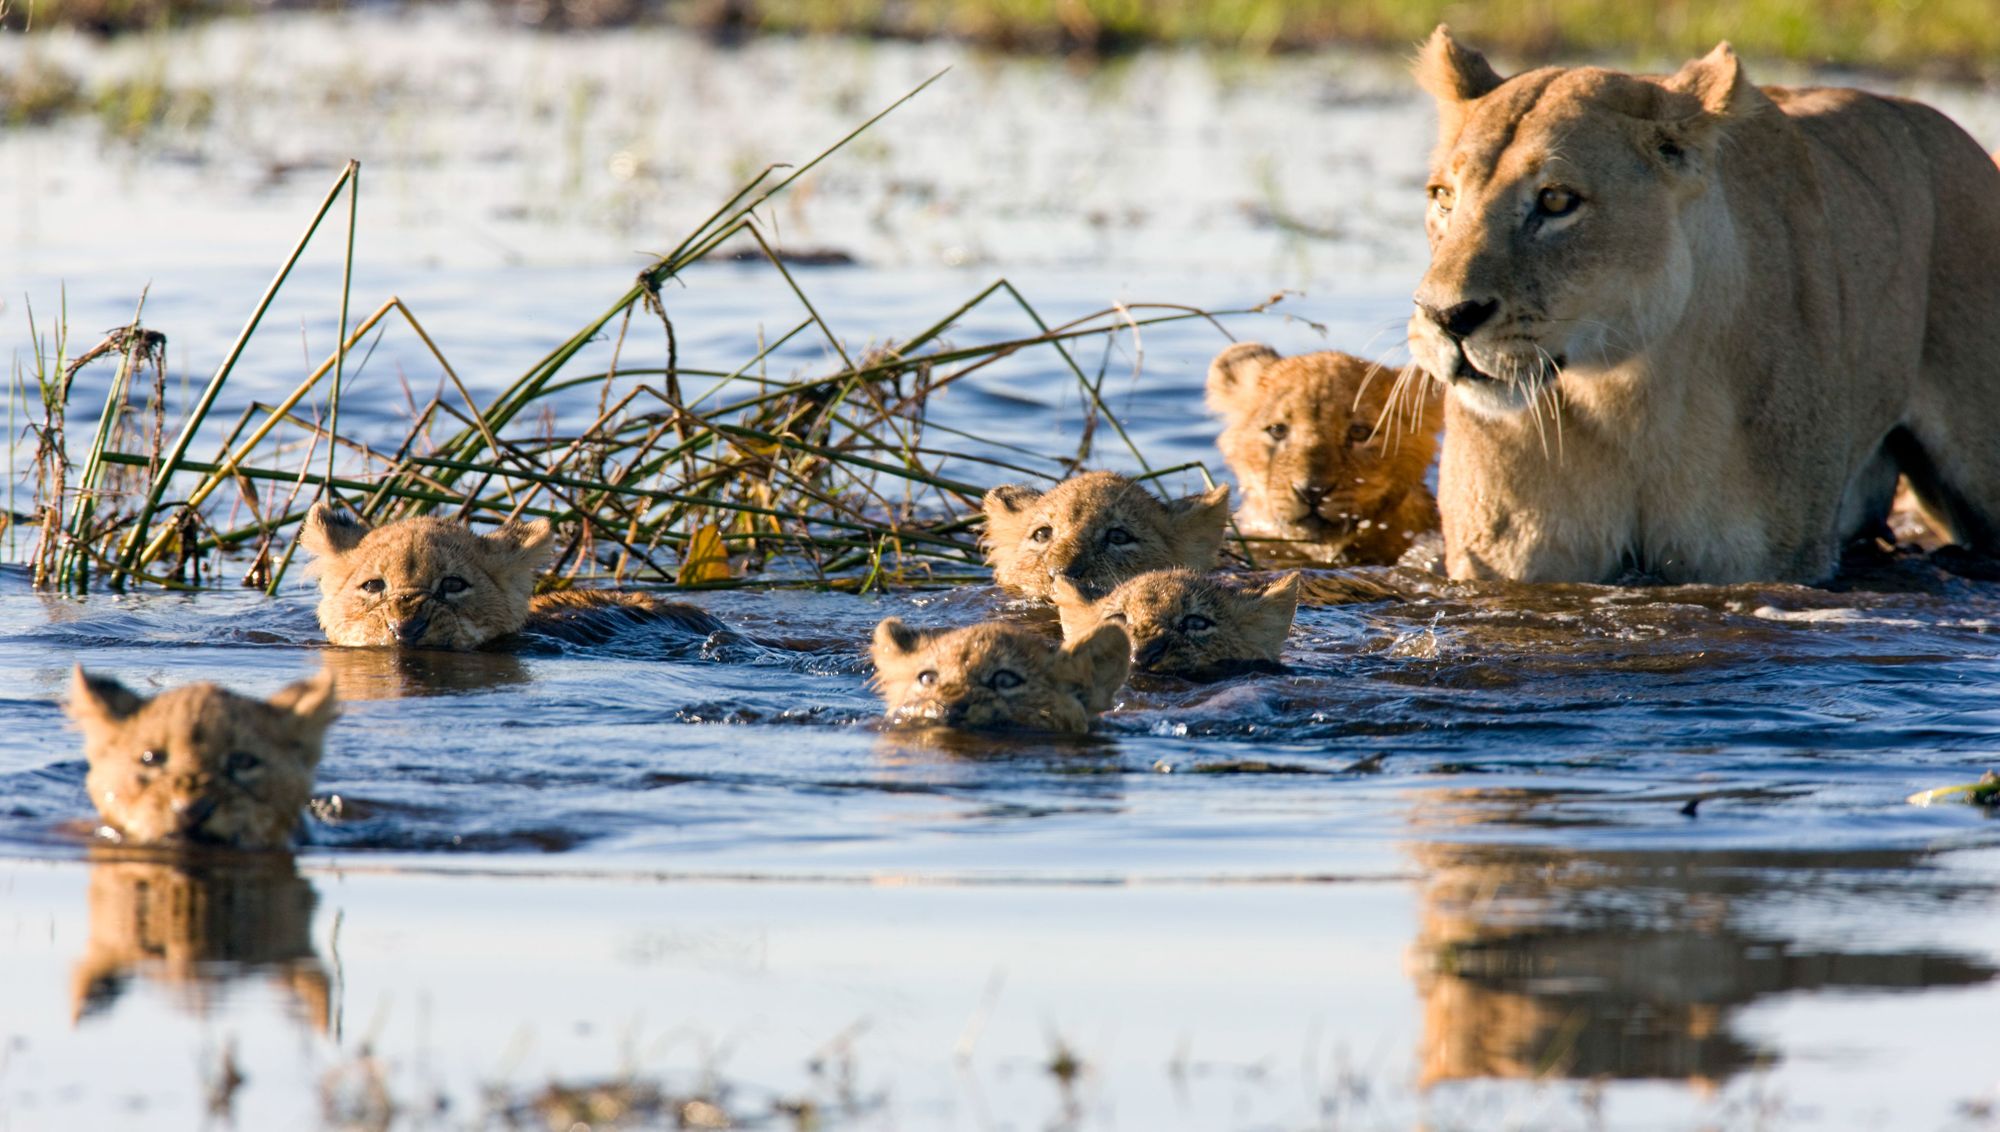 A lioness guides her litter of cubs through the water of the Okavango in Botswana. Photo: Getty